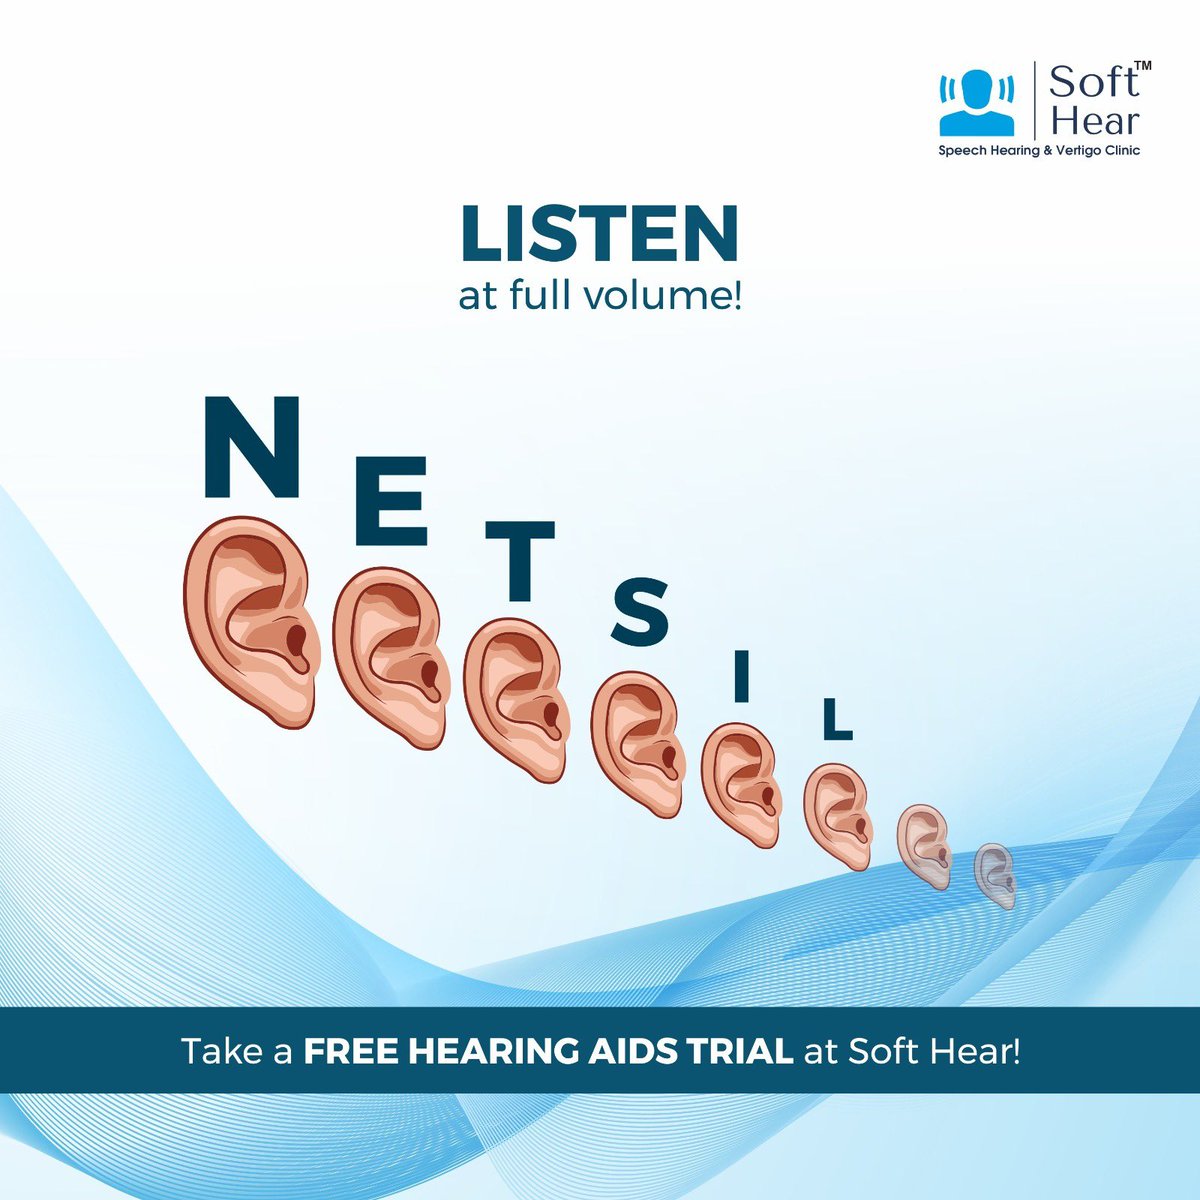 Don't miss out on any sound that makes life the joyride it is! Listen at full volume with advanced tech hearing aids from us, visit Soft Hear for a FREE hearing aids trial! 
.
.
.
.
#softhear #audiology #hearingaid #HearingCare #hearingloss #hearingsolutions